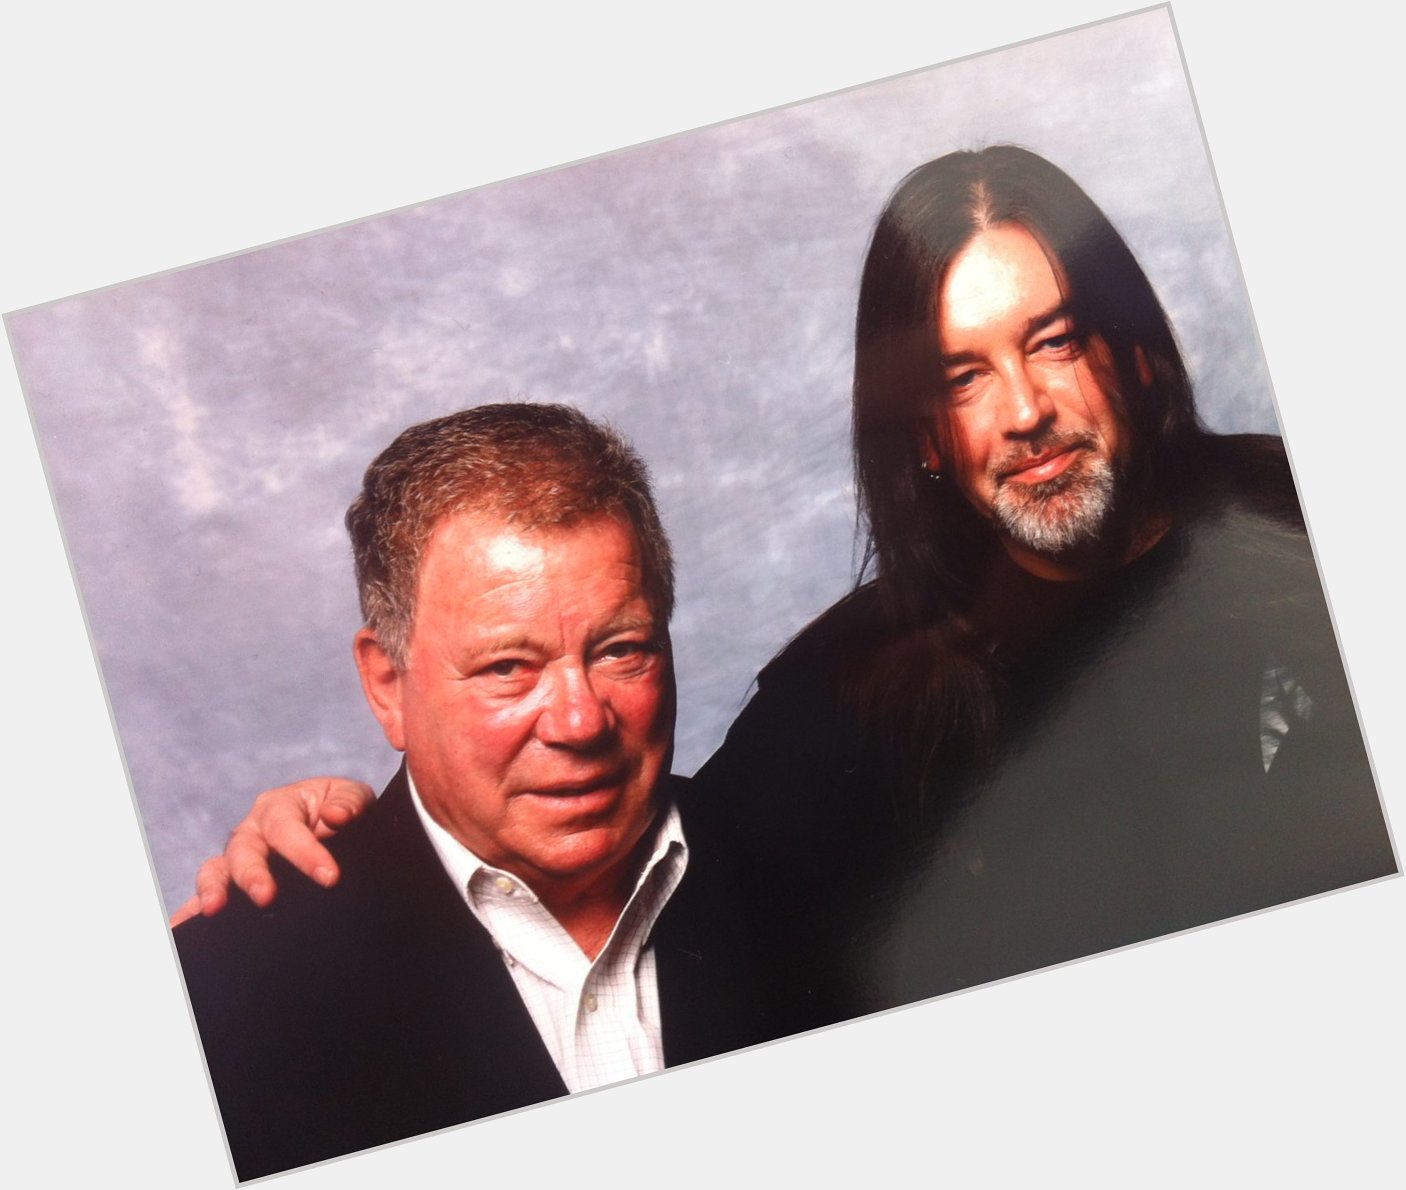 Happy 90th birthday William Shatner! He looks so happy to see me. 